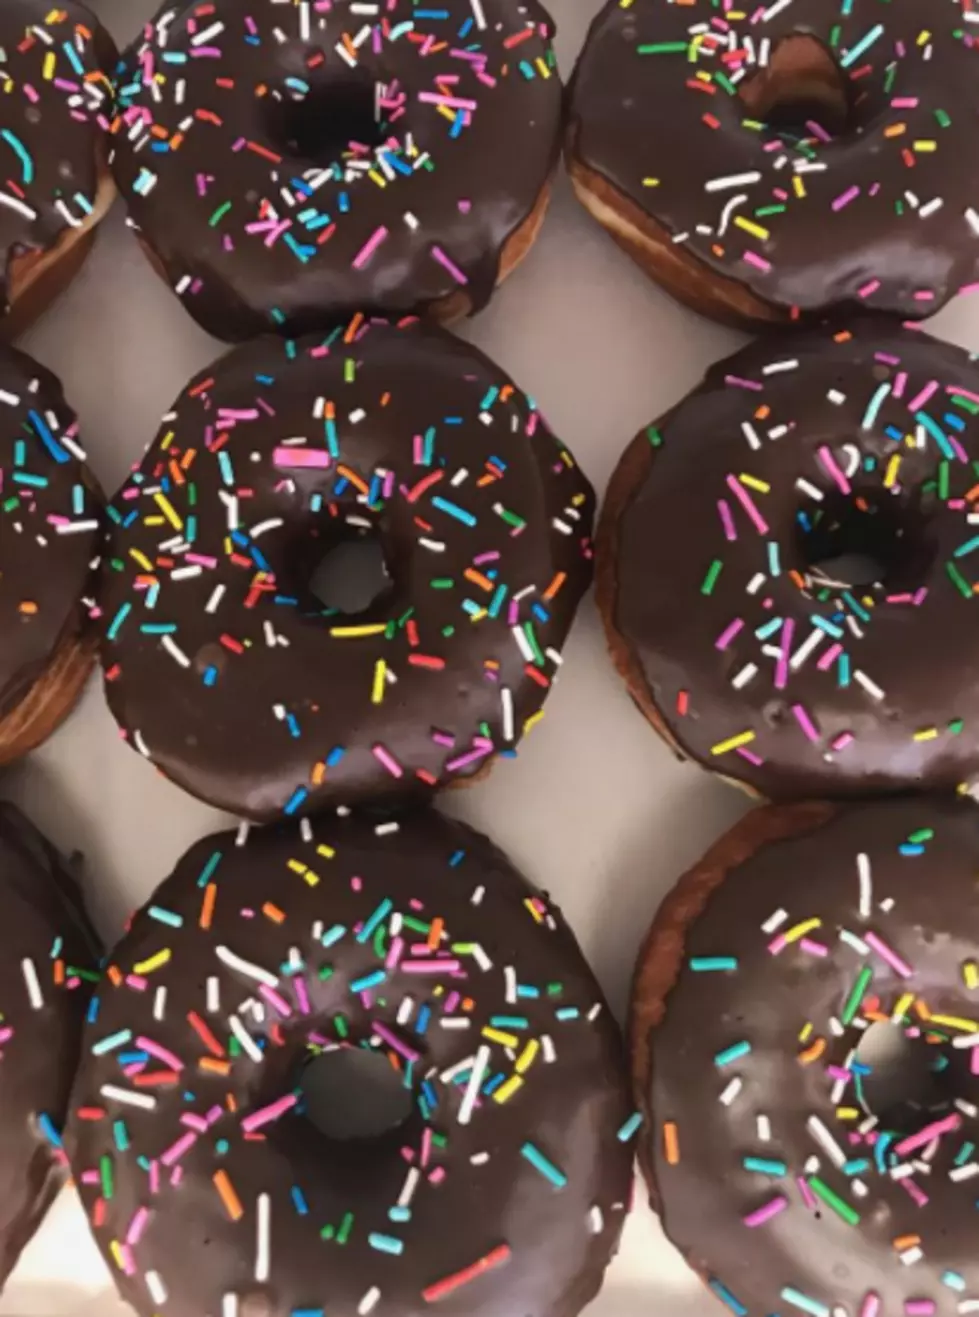 New Vegan Donut Joint Comes To Buffalo!